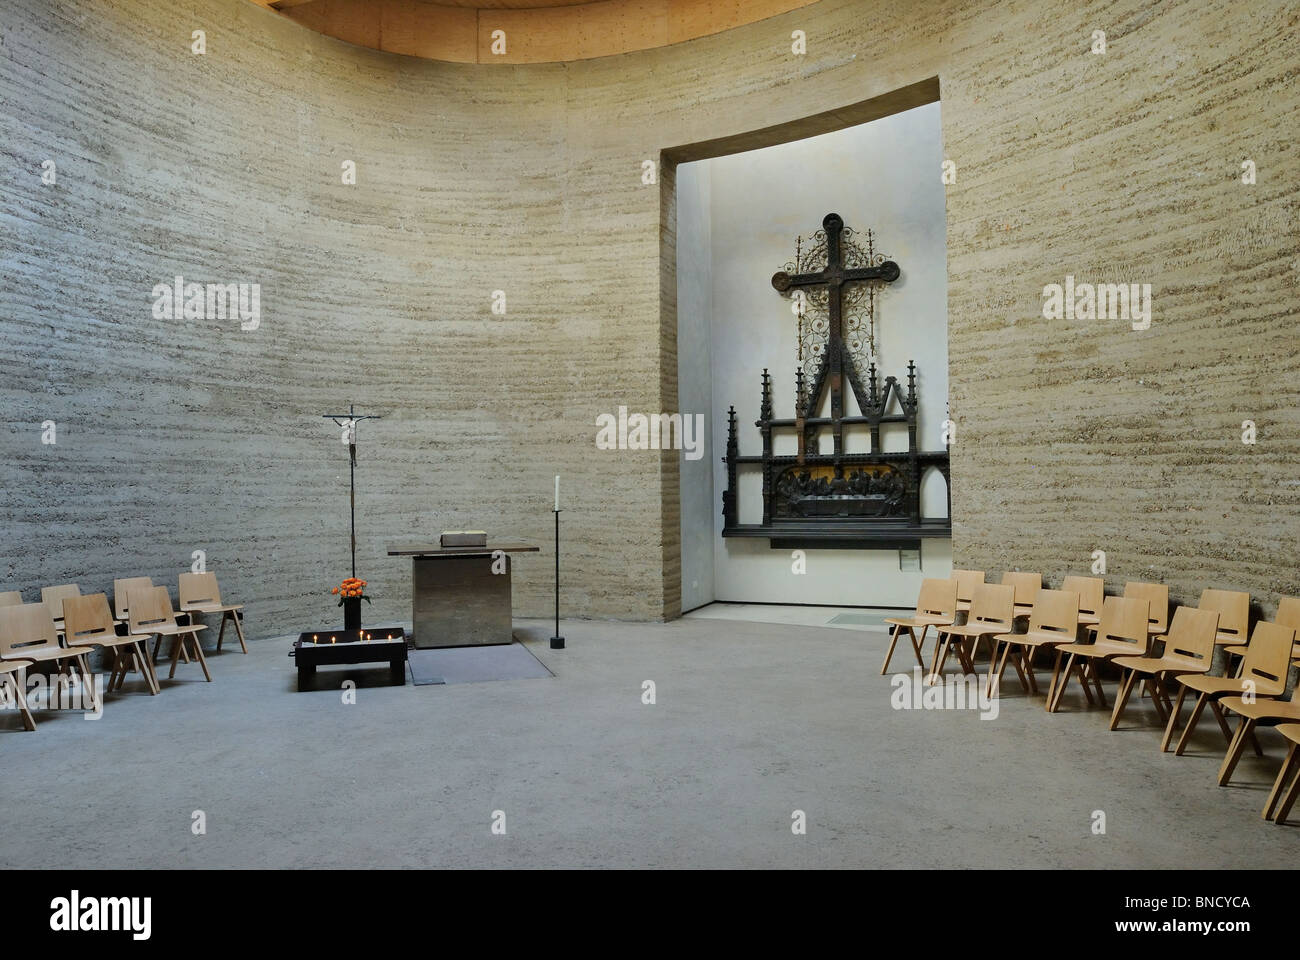 Reconciliation Church, Chapel of Reconciliation, Berlin Wall, Bernauer Strasse, Mitte district, Berlin, Germany, Europe Stock Photo